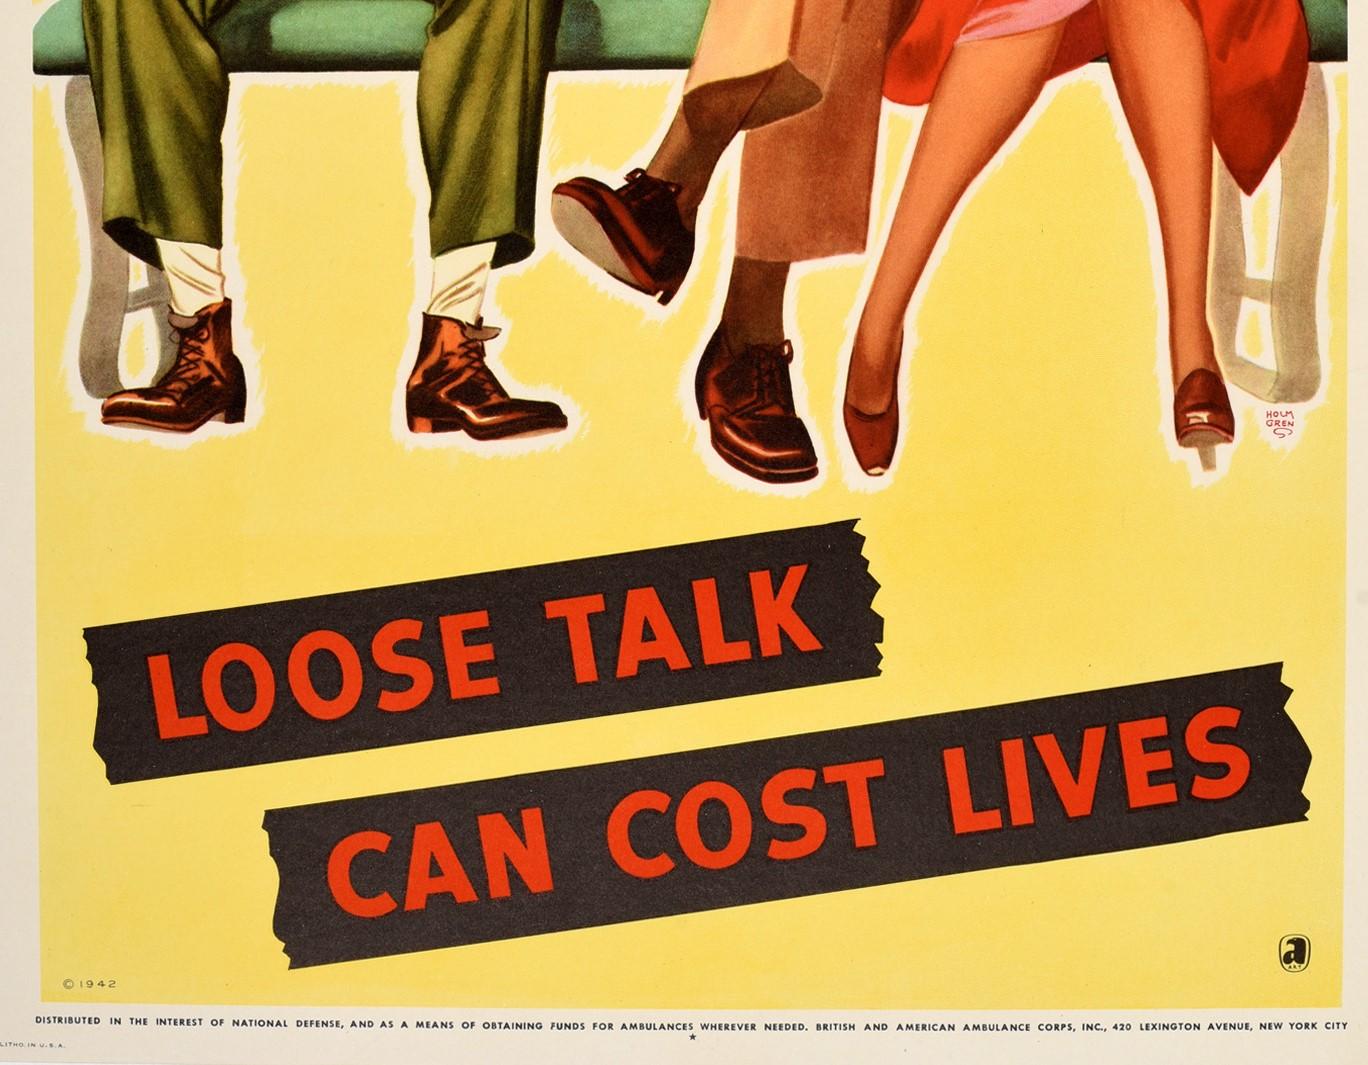 loose talk can cost lives poster meaning